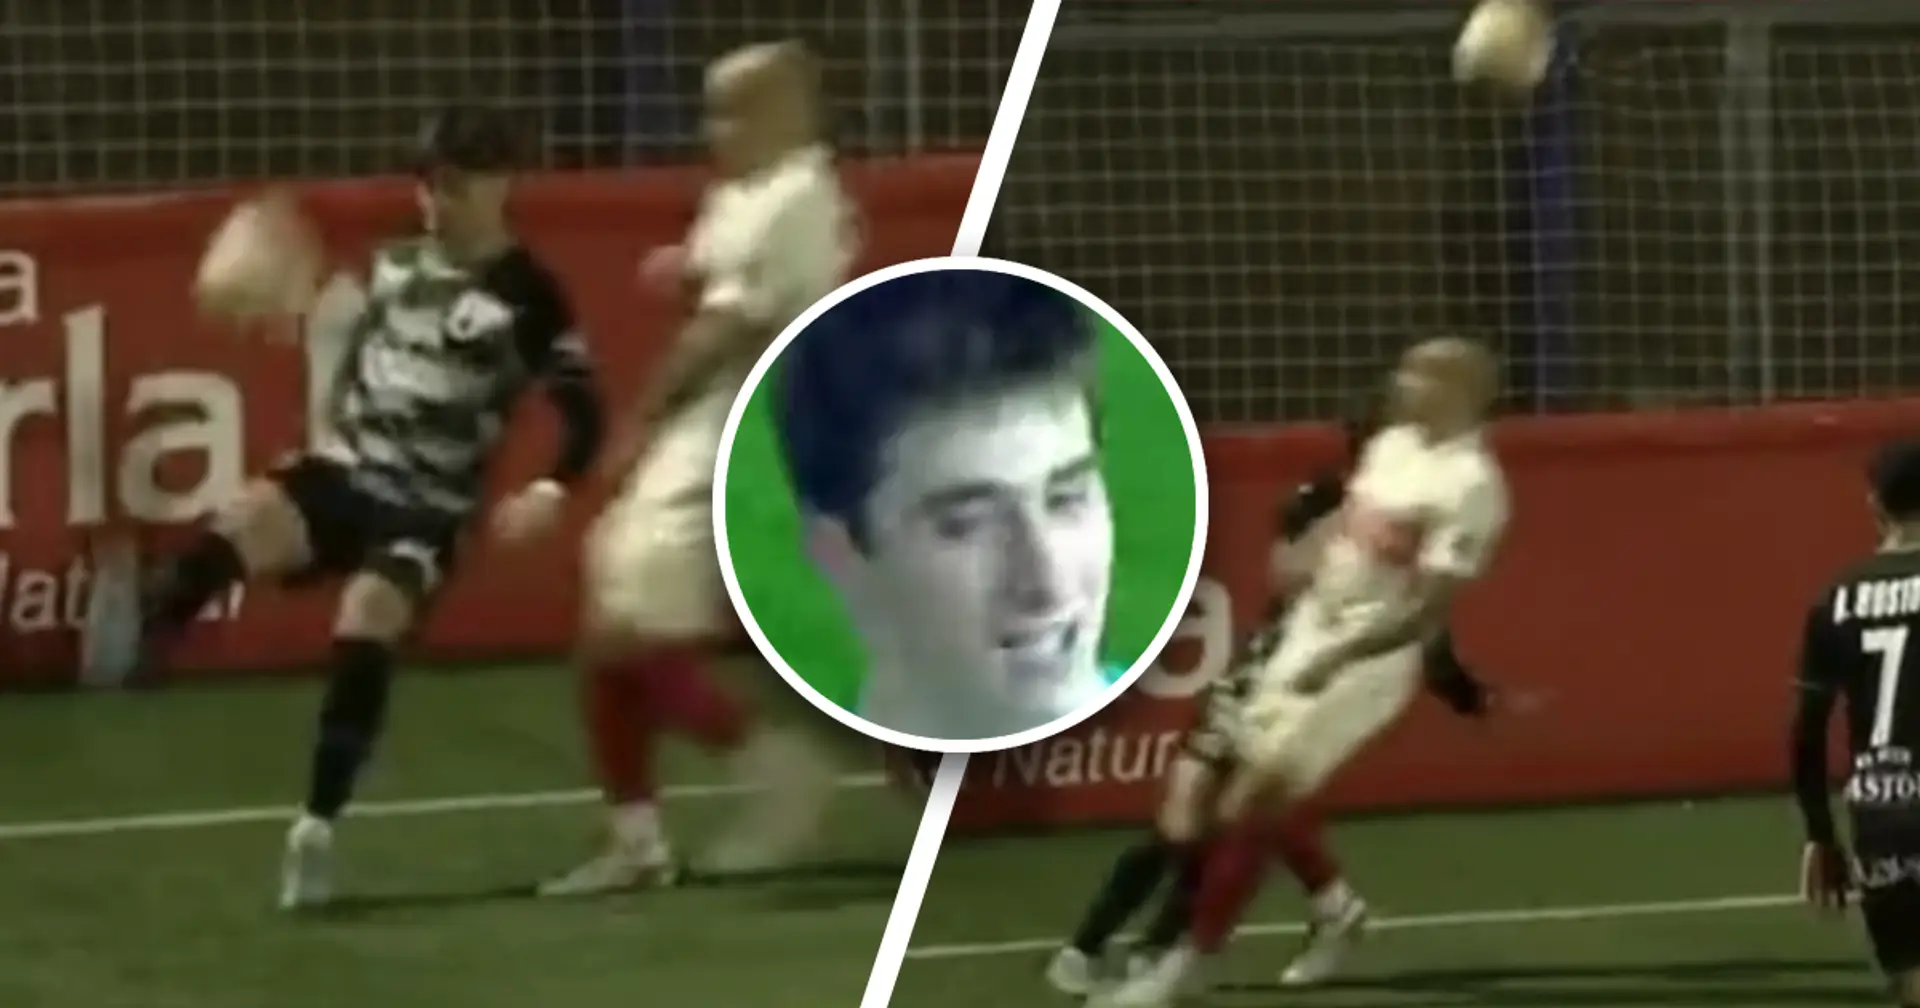 Barca's new signing Pablo Torre destroys two opponents with crazy skills in 5 seconds